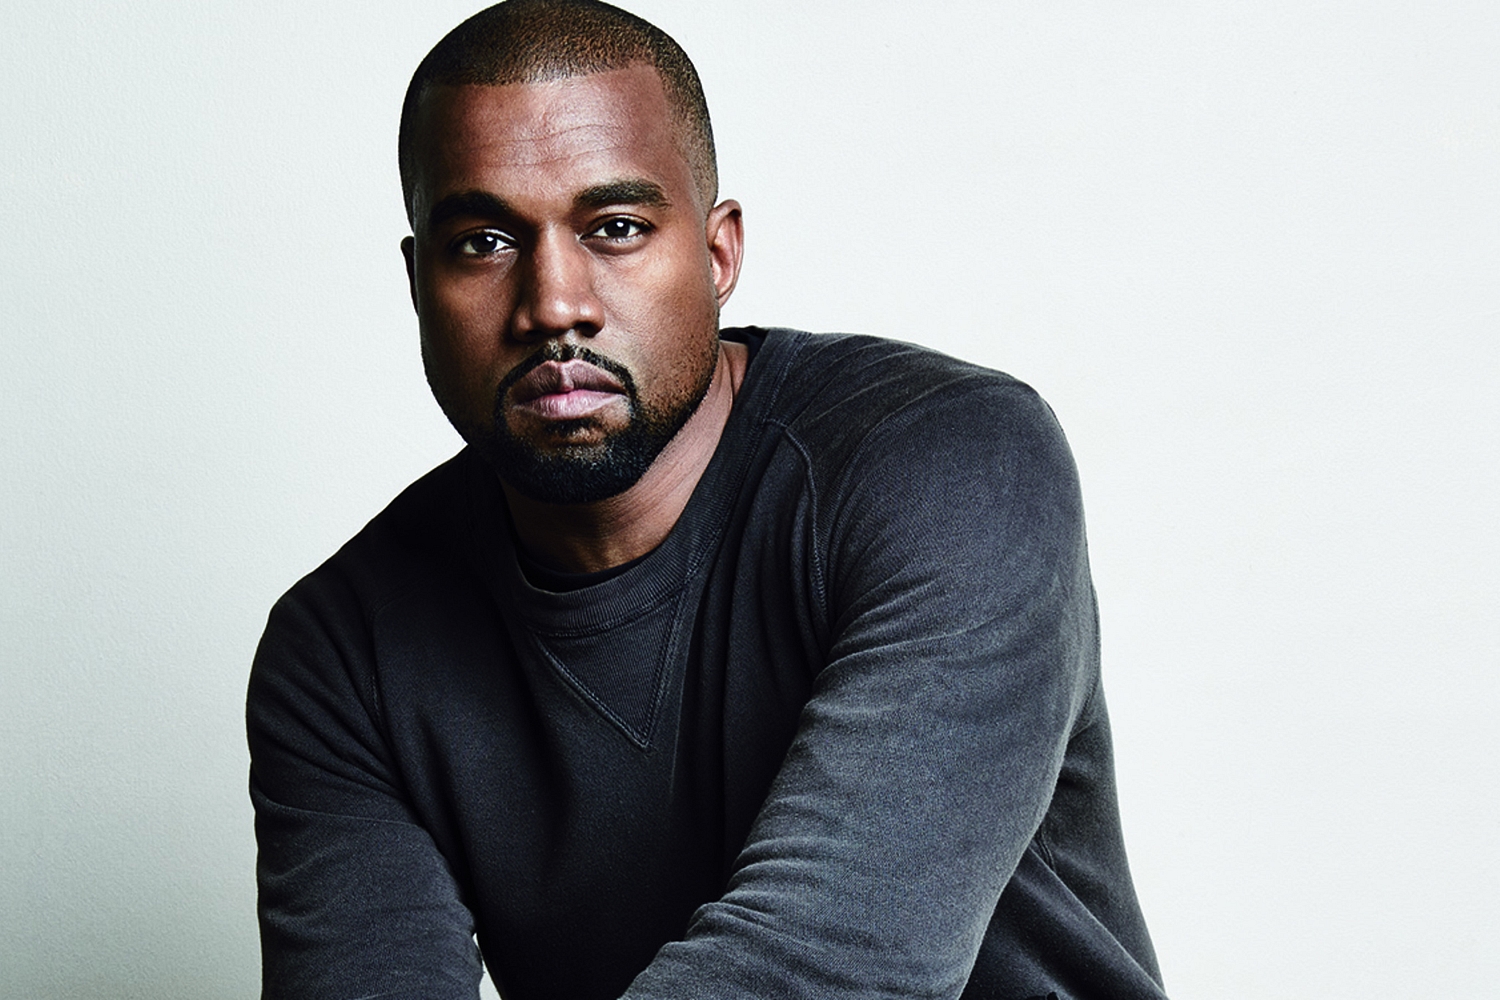 Kanye West pays tribute to late mother on 'DONDA'